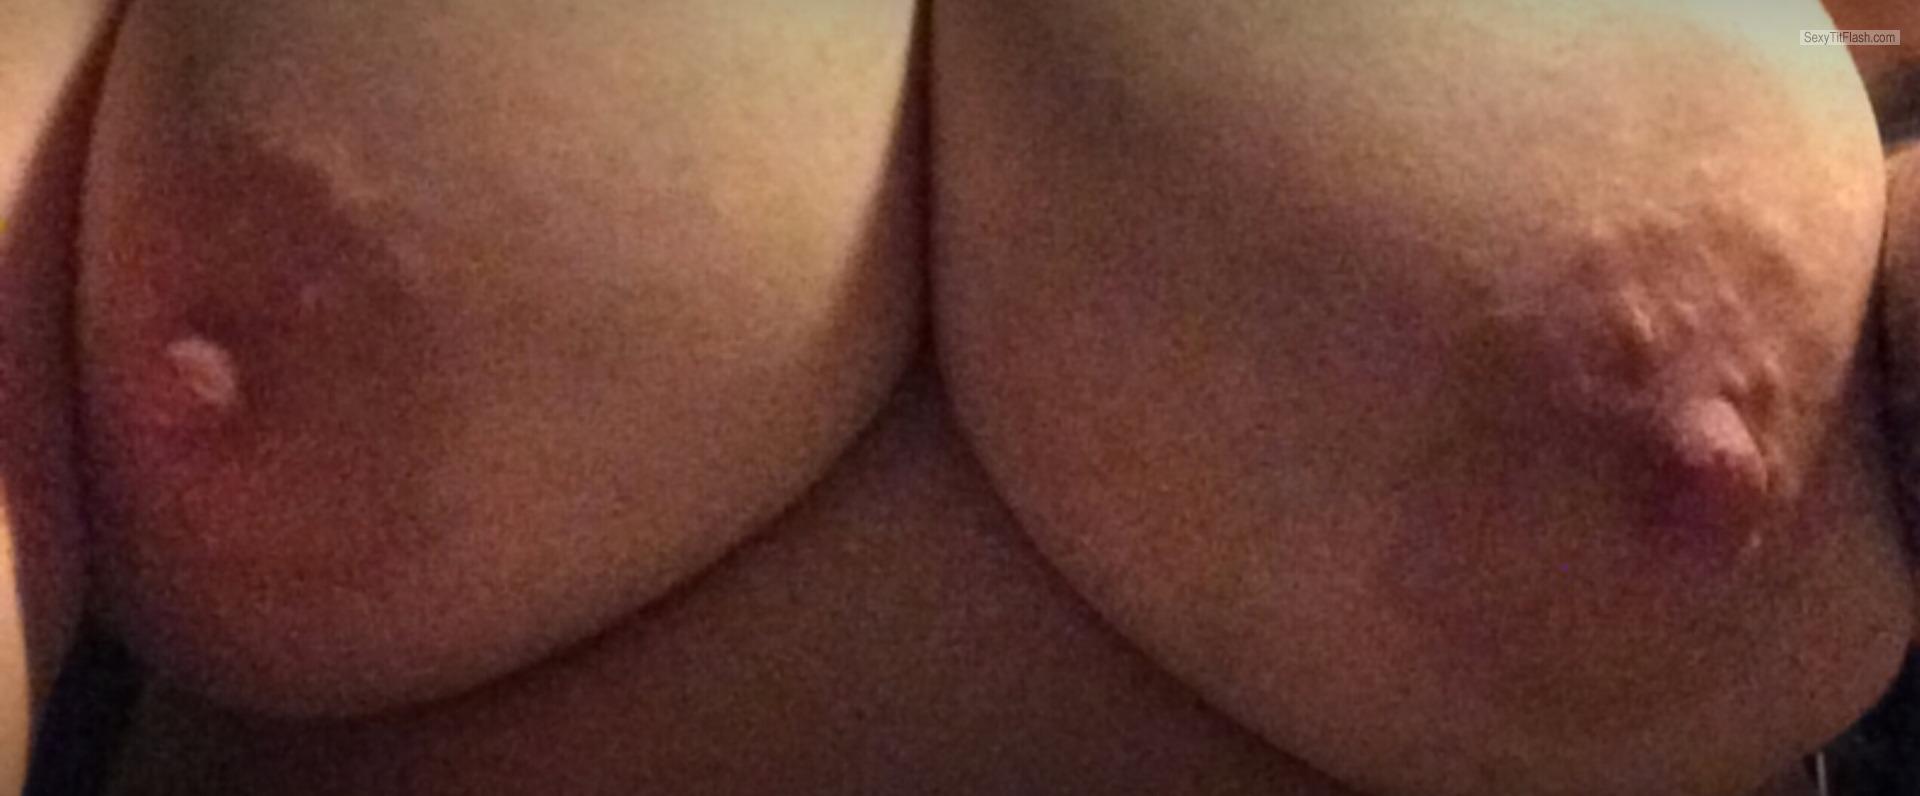 Tit Flash: My Extremely Big Tits (Selfie) - Bigg Juggs from United States